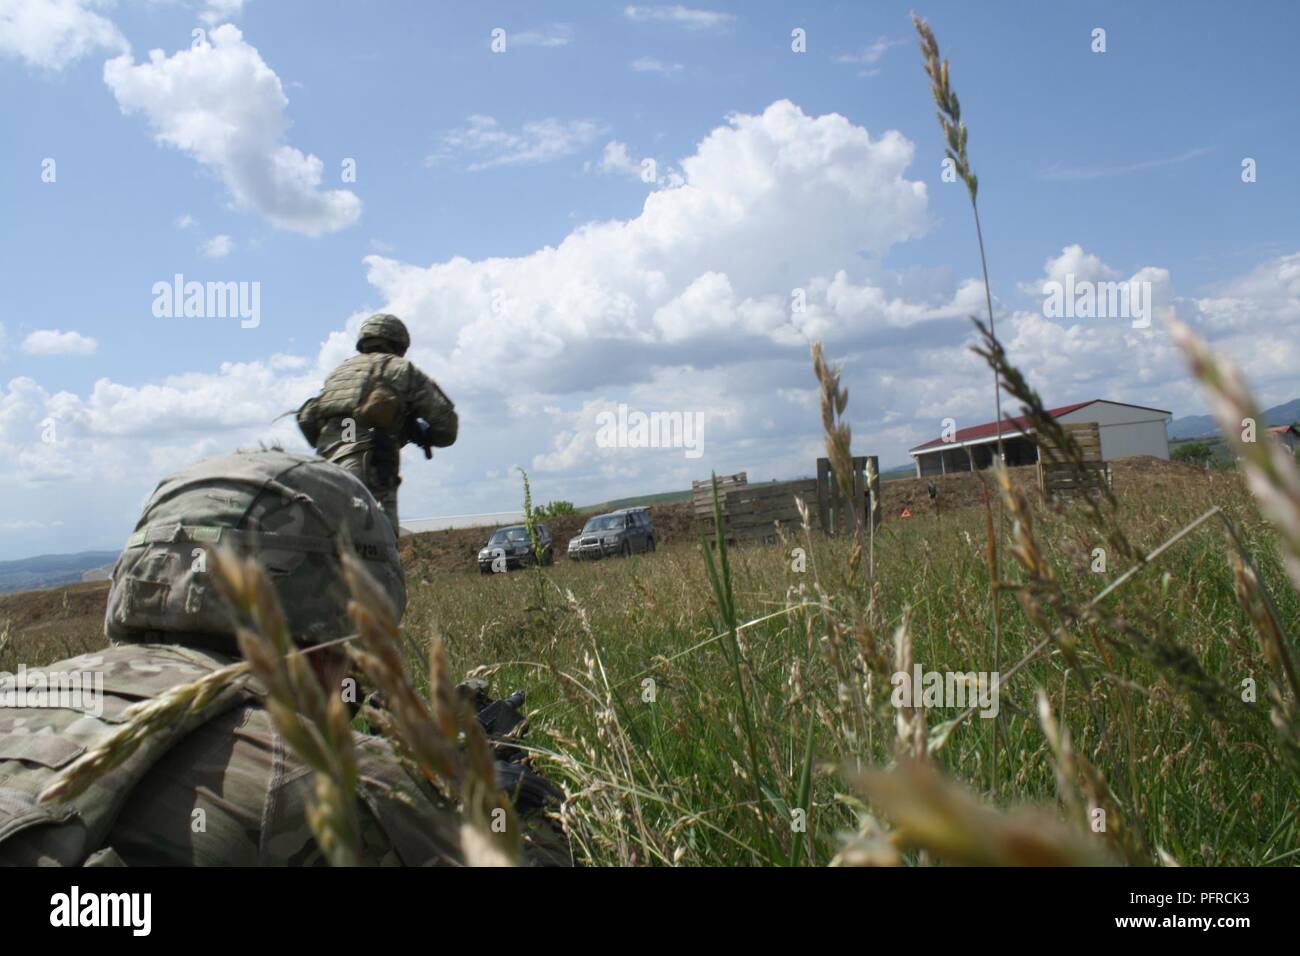 A Soldier bounds forward toward cover while another suppresses the enemy during Advanced Rifle Marksmanship and Individual Movement Techniques training May 24 at Camp Marechal De Lattre De Tassigny, Kosovo. Stock Photo